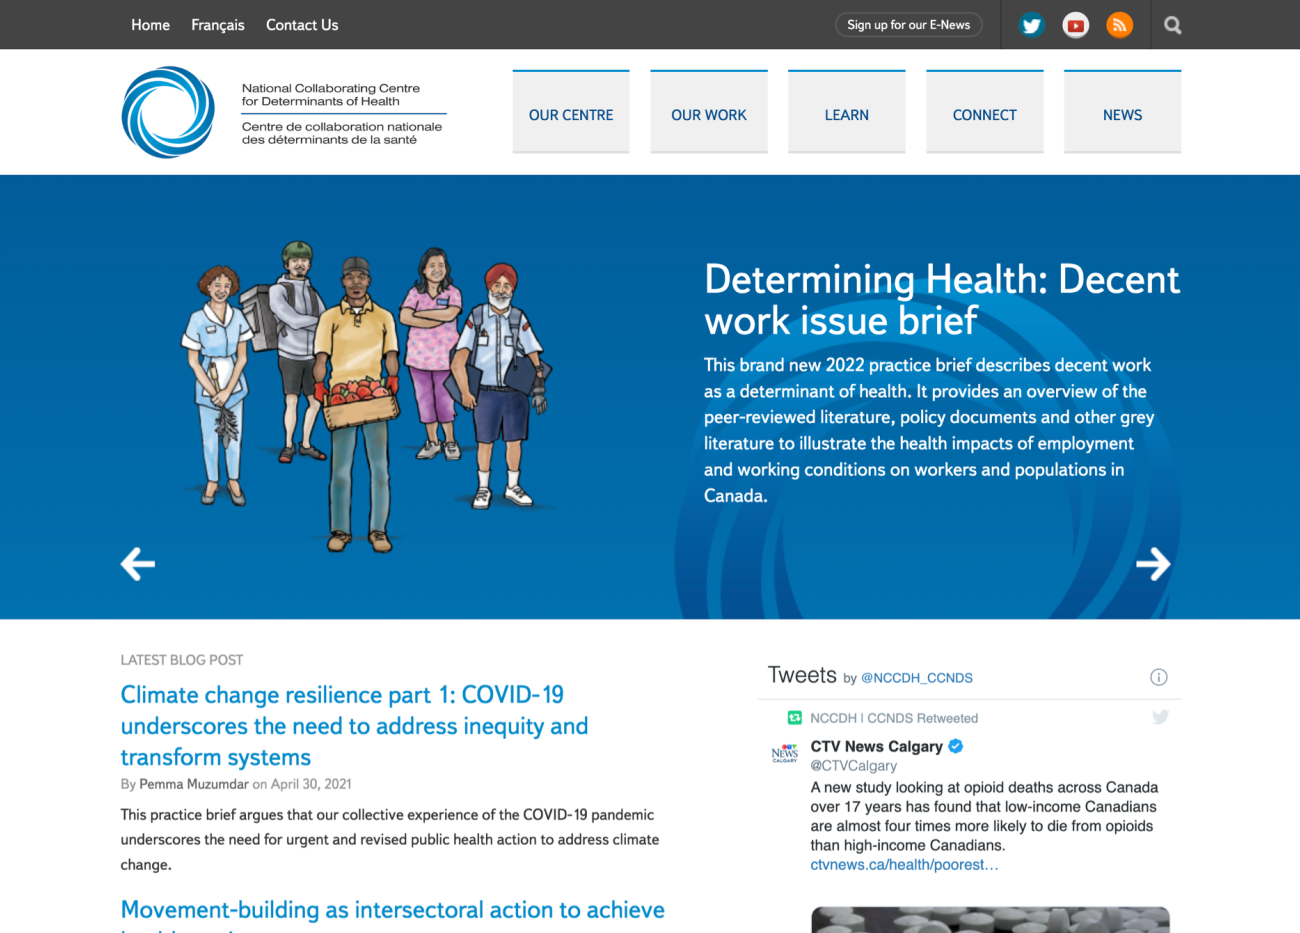 Screenshot of the NCCDH home page